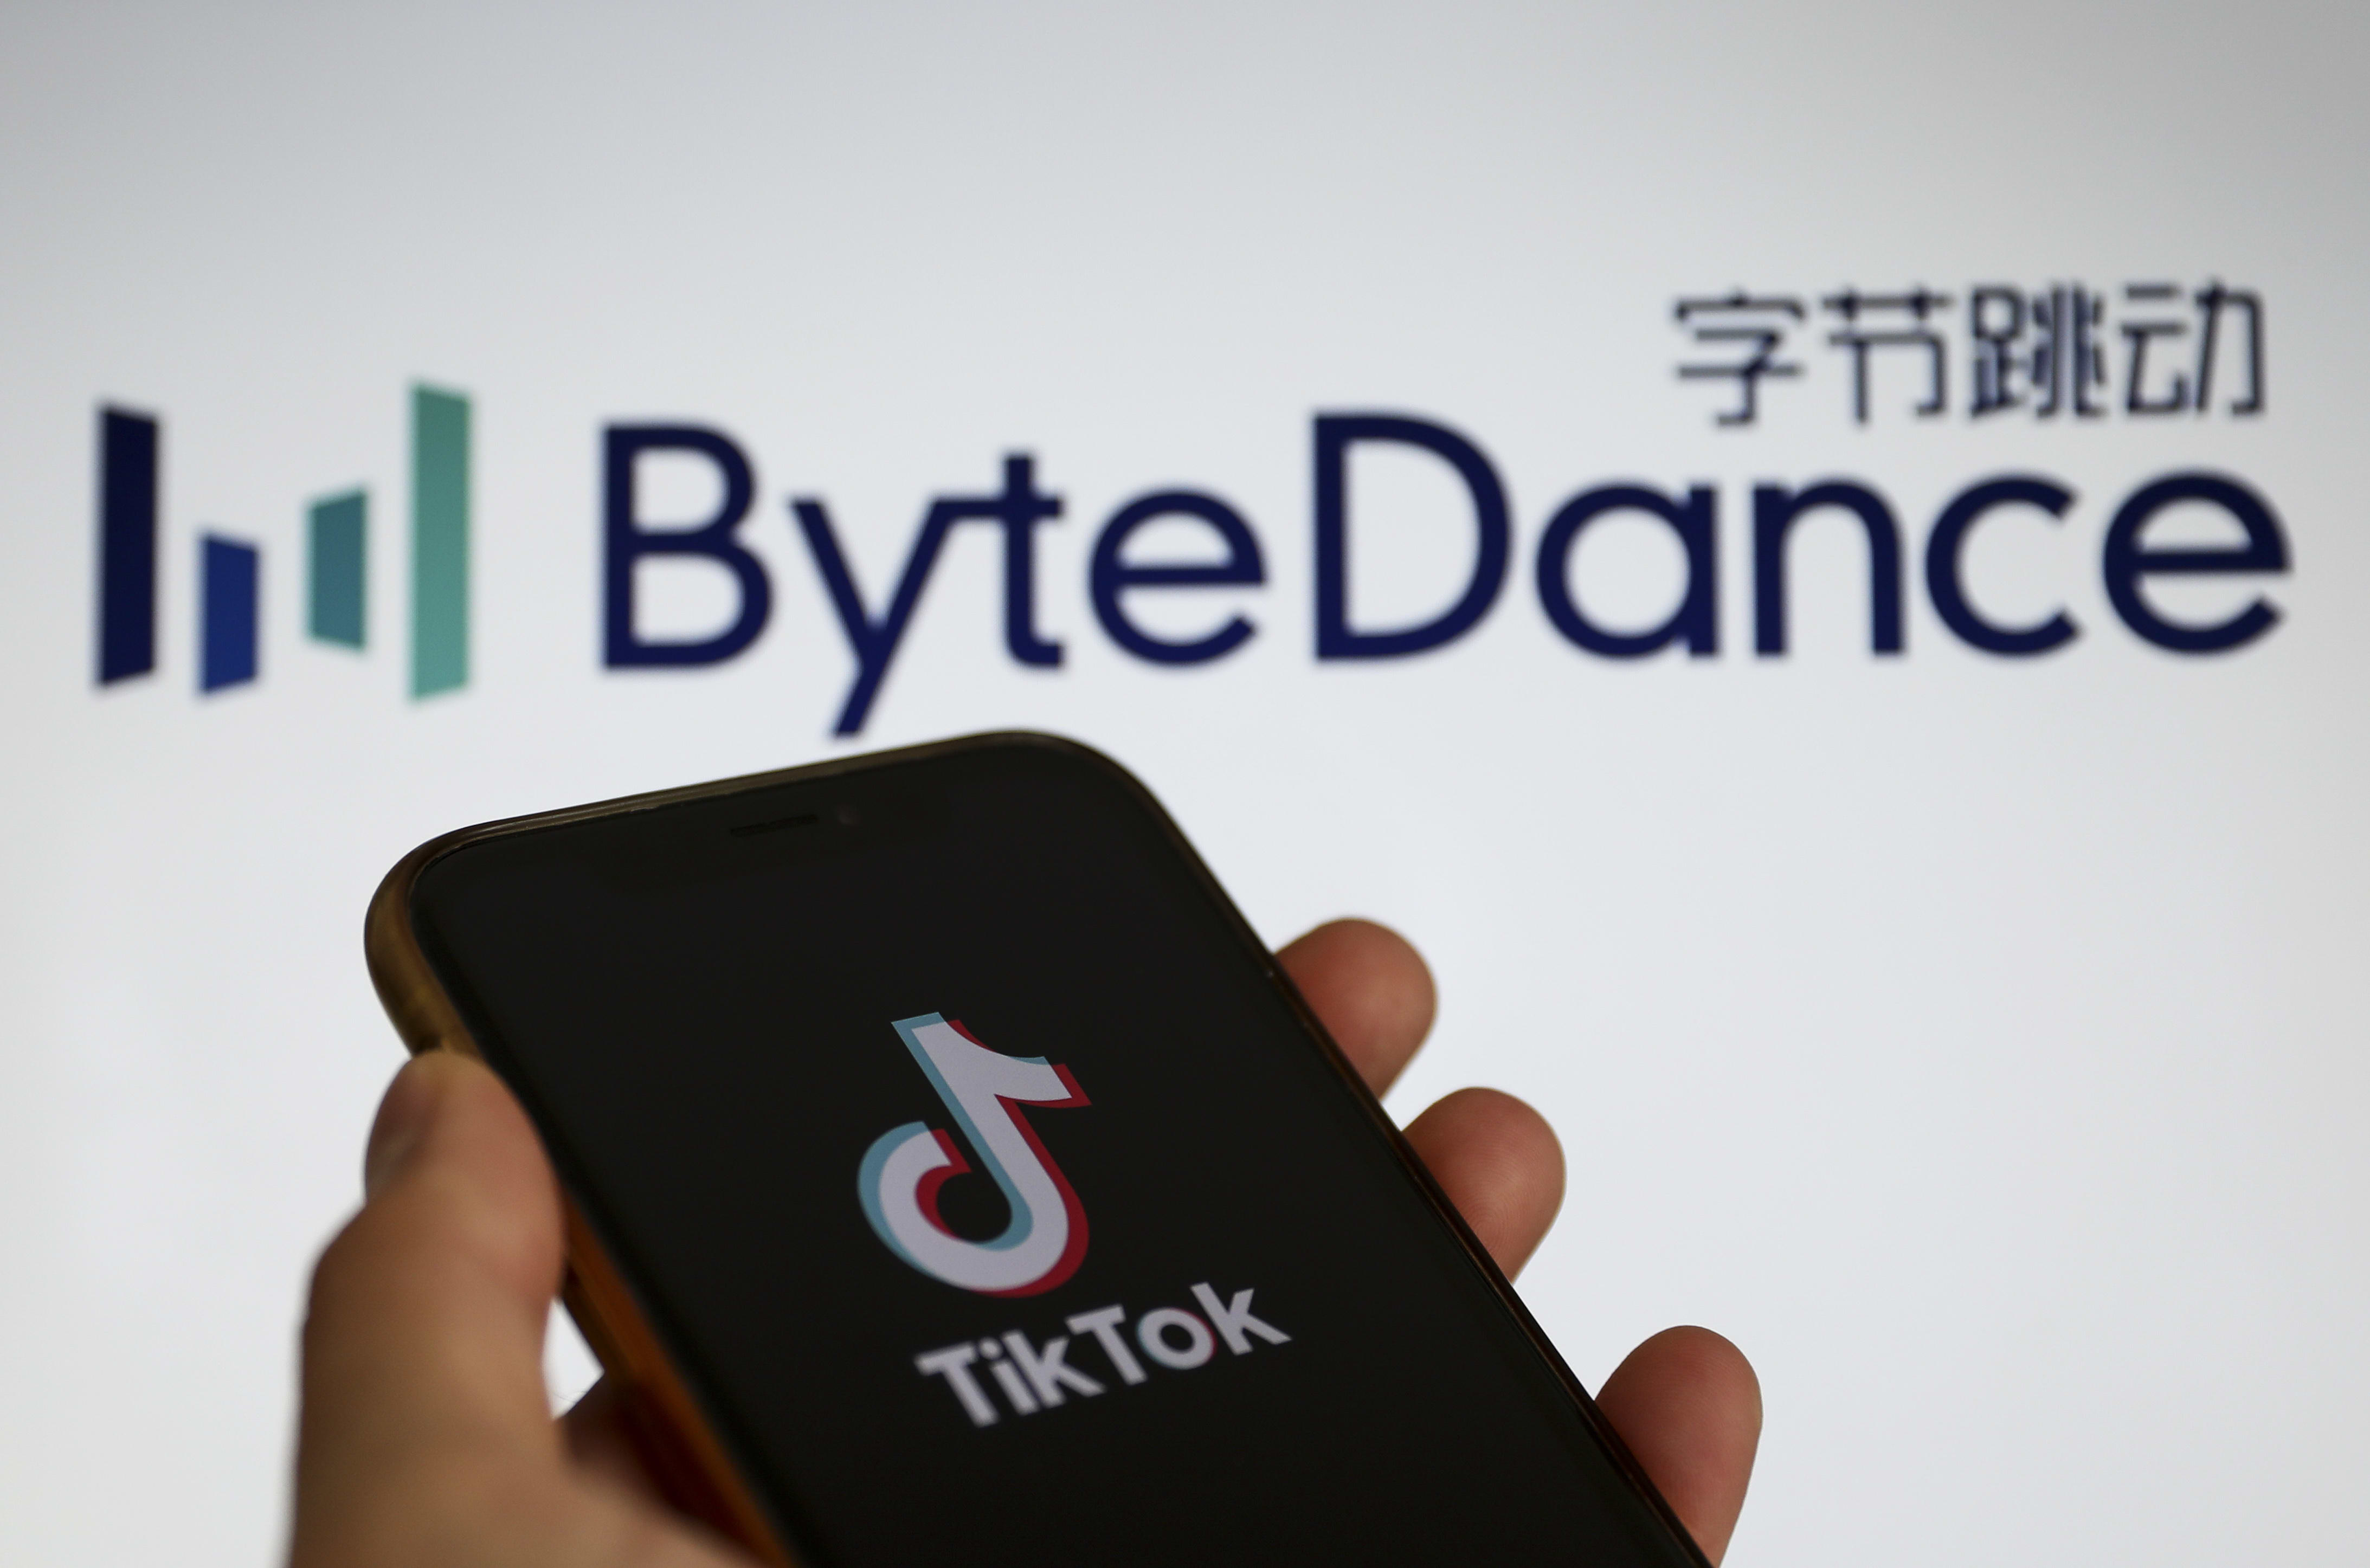 ByteDance takes on Tencent with major gaming studio acquisition